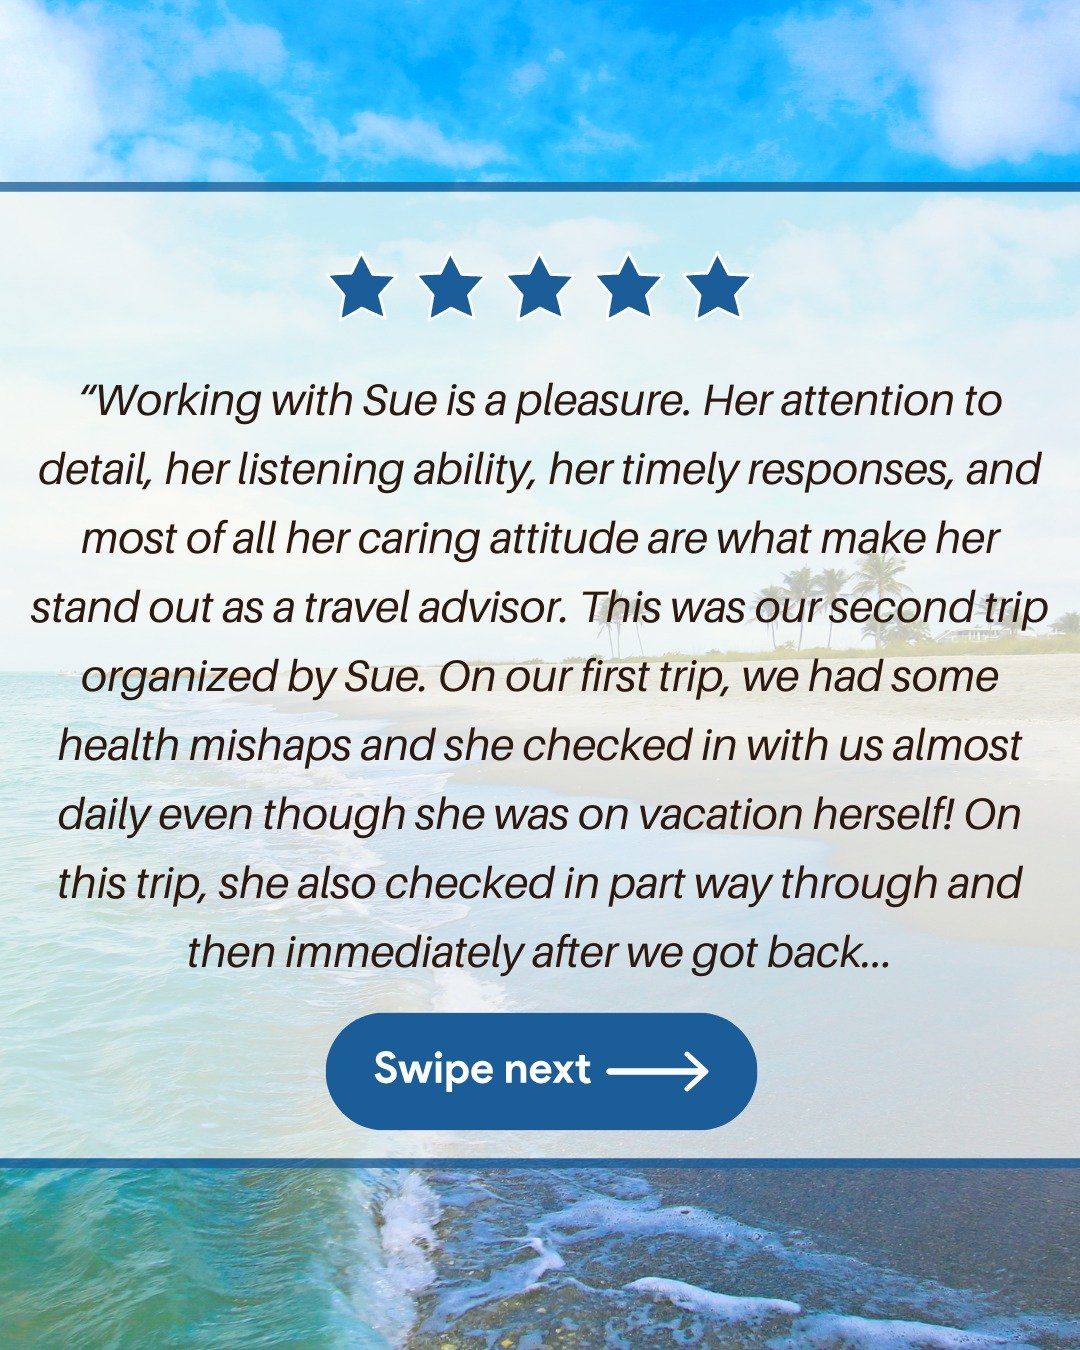 🌟 Why choose Susan at Journeys Around The World for your next luxury getaway? Just listen to what her client says: 'Working with Sue is a pleasure. Her meticulous attention to detail, genuine care, and passion for delivering the best travel experien